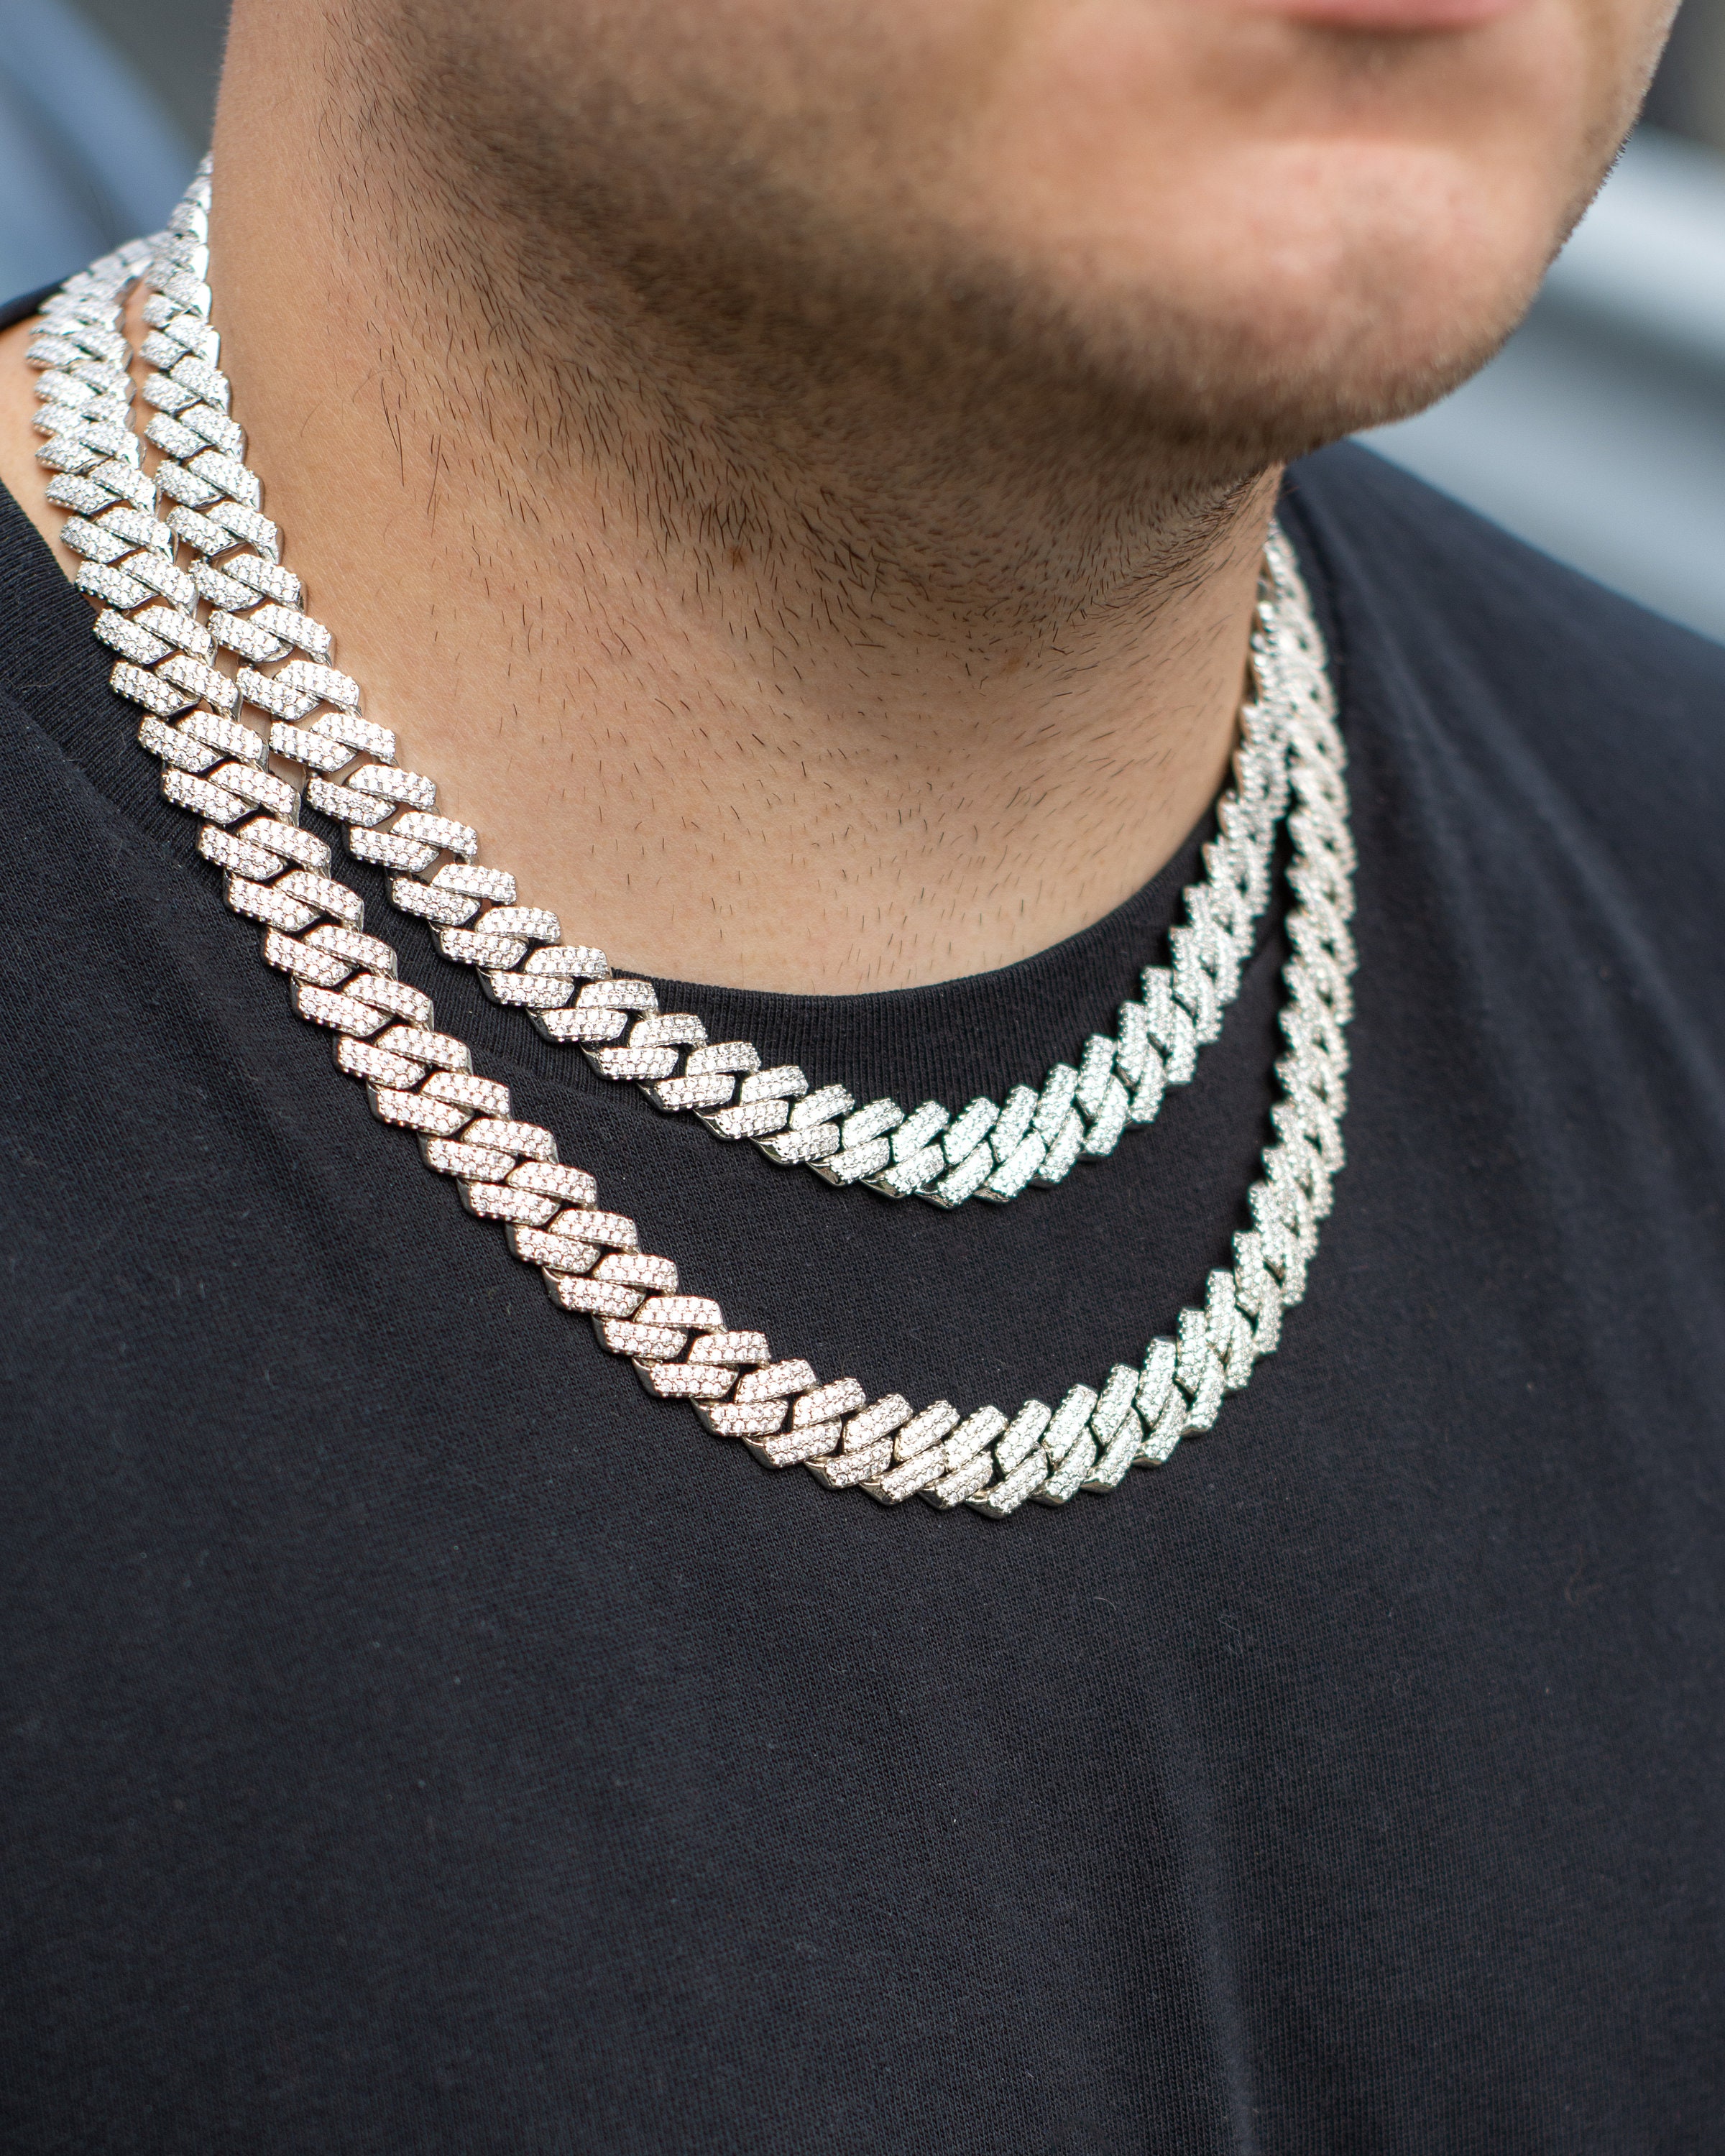 14k Iced Out Thick 20mm Prong Set Miami Cuban Link Chain New Zealand ...